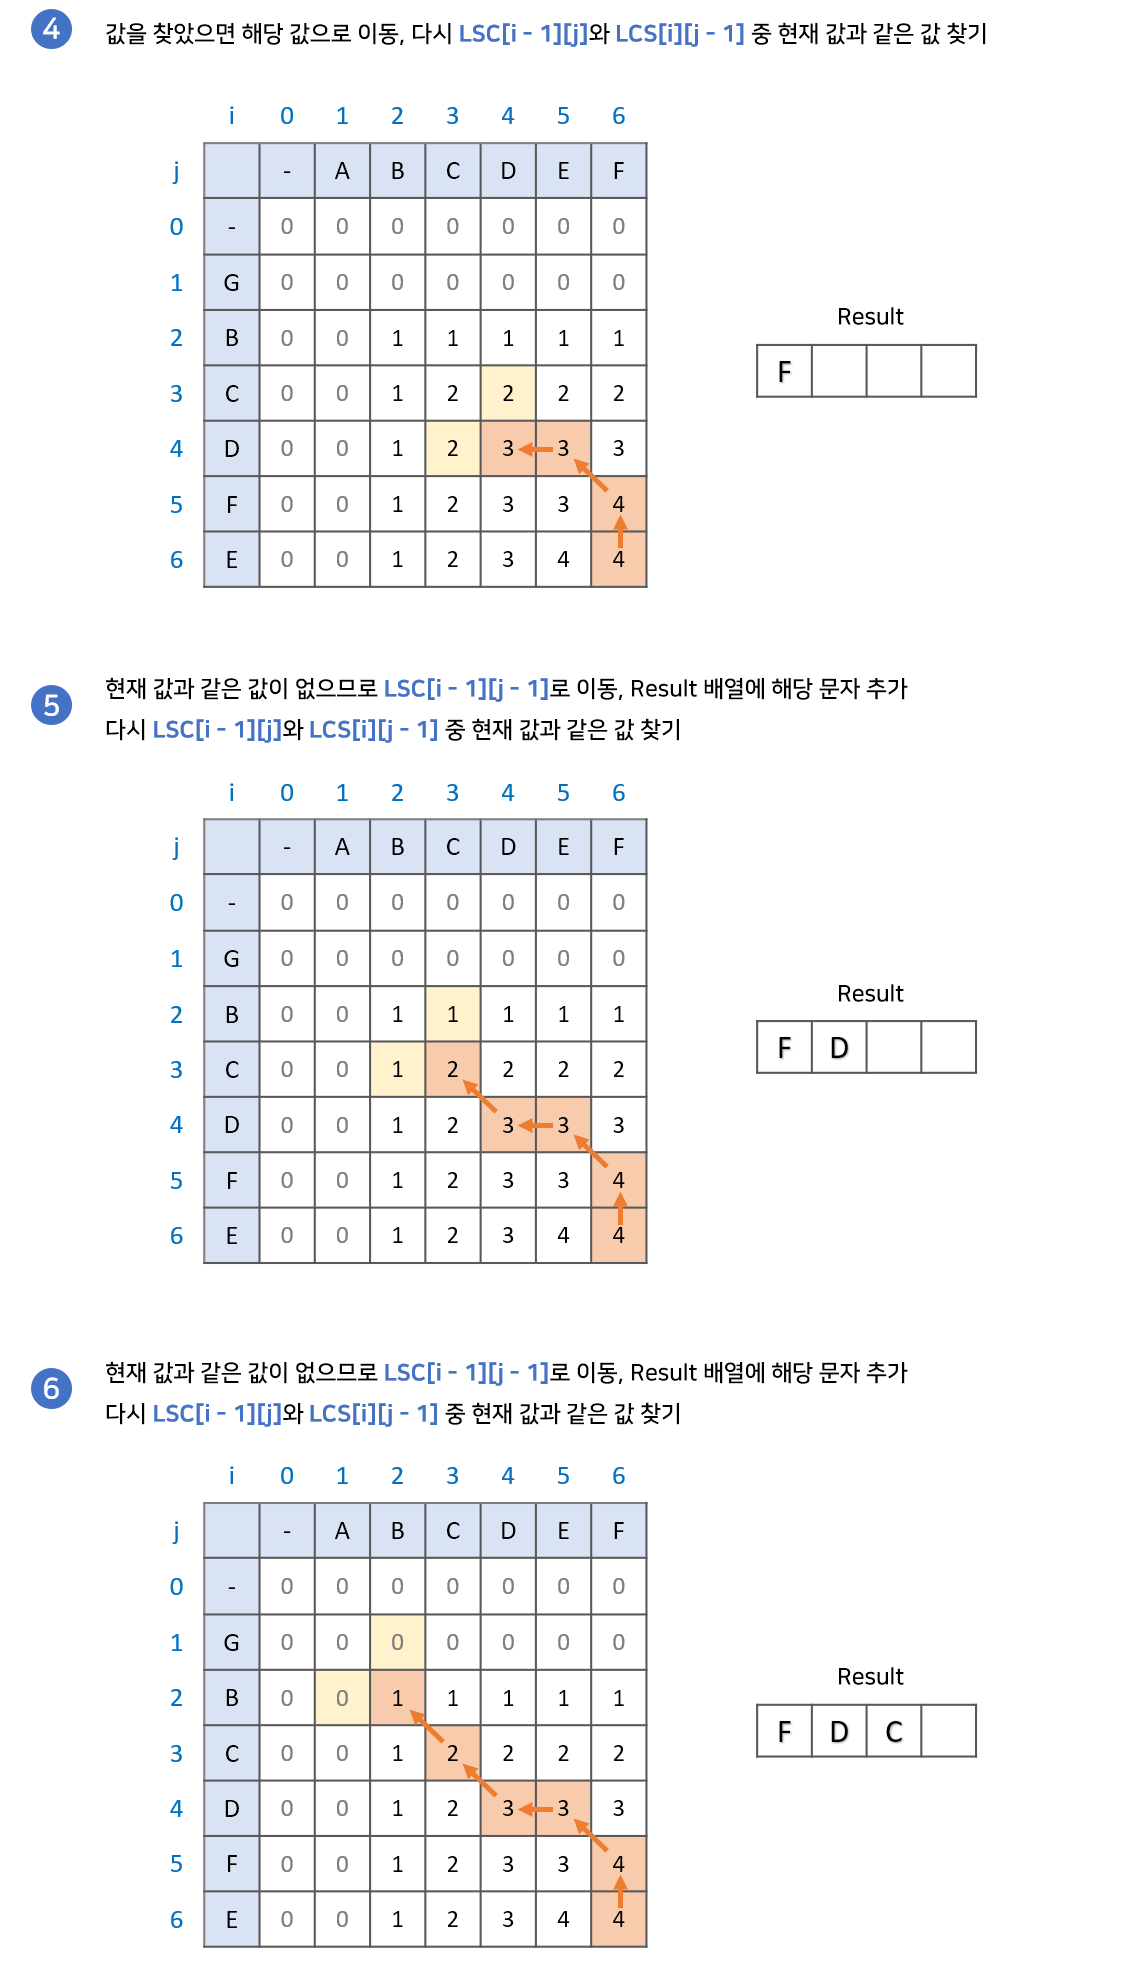 logest common subsequence 찾기 2